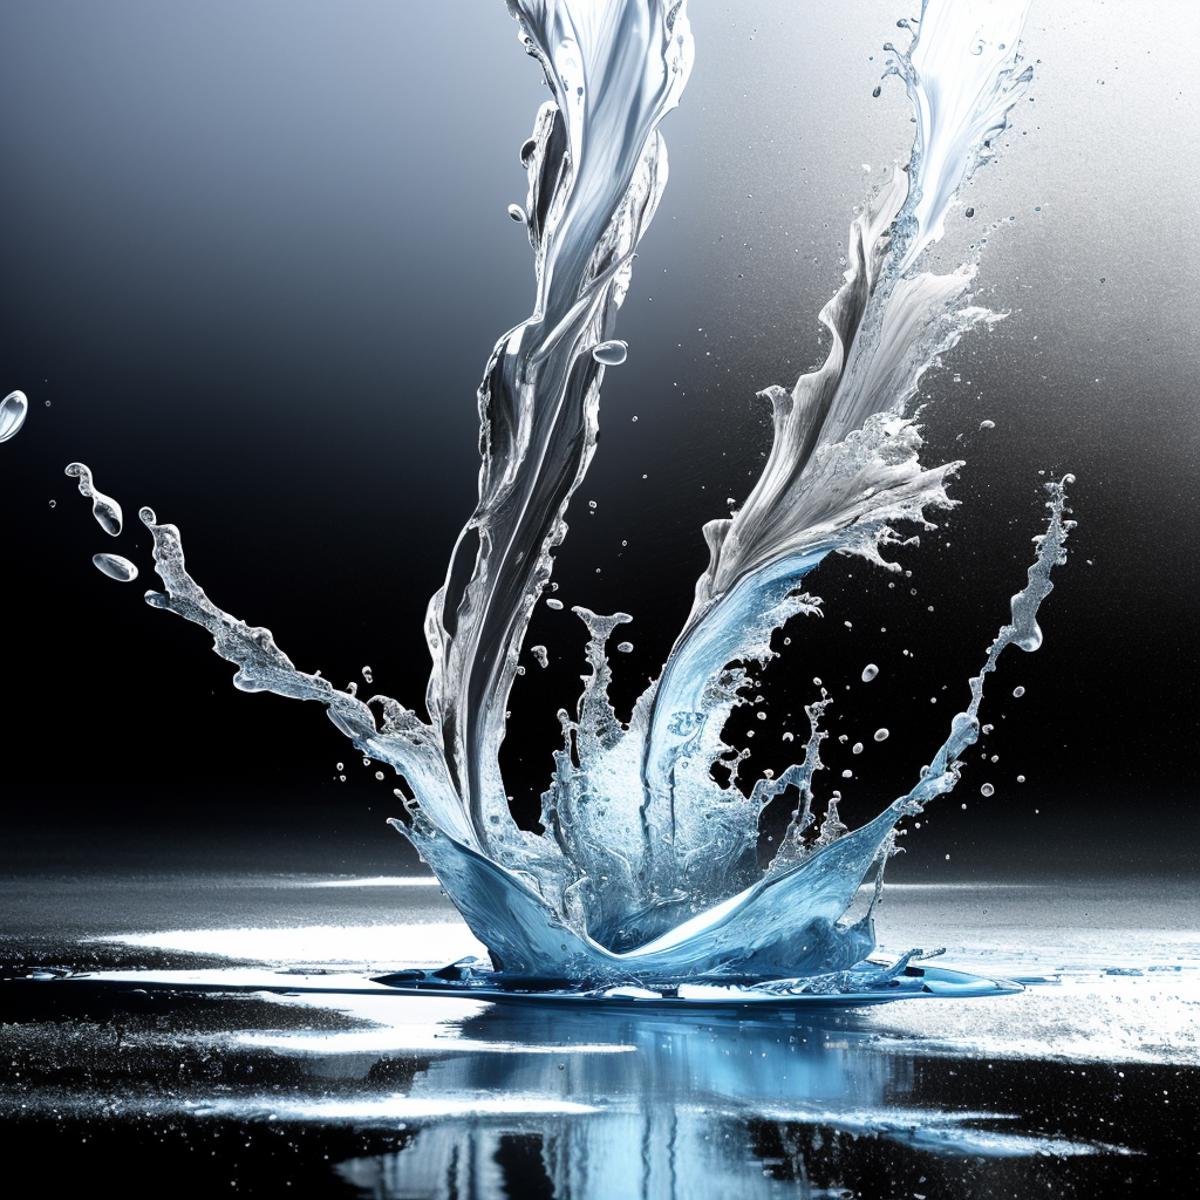 Special effects water art style image by comingdemon